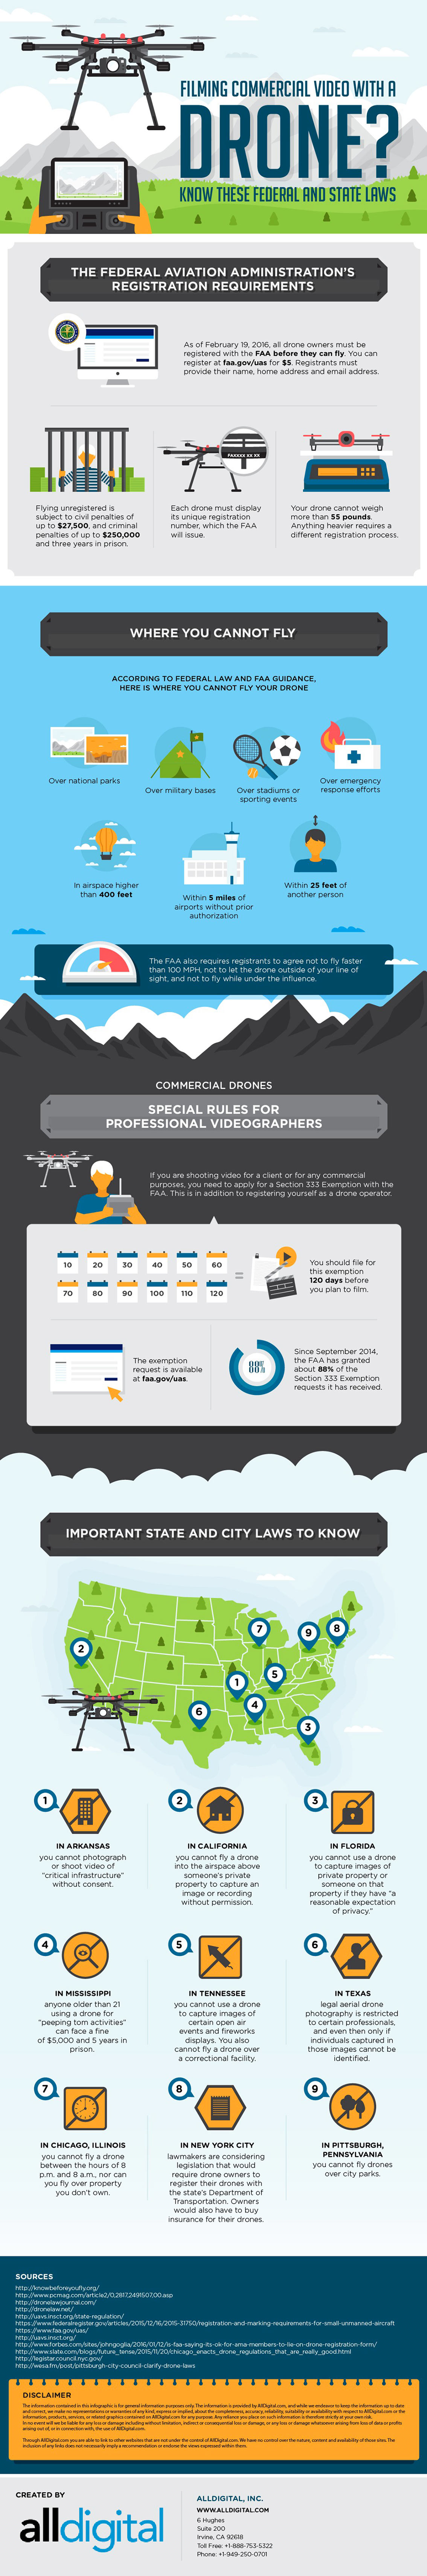 Drone Filming Laws and Regulations by State Infographic